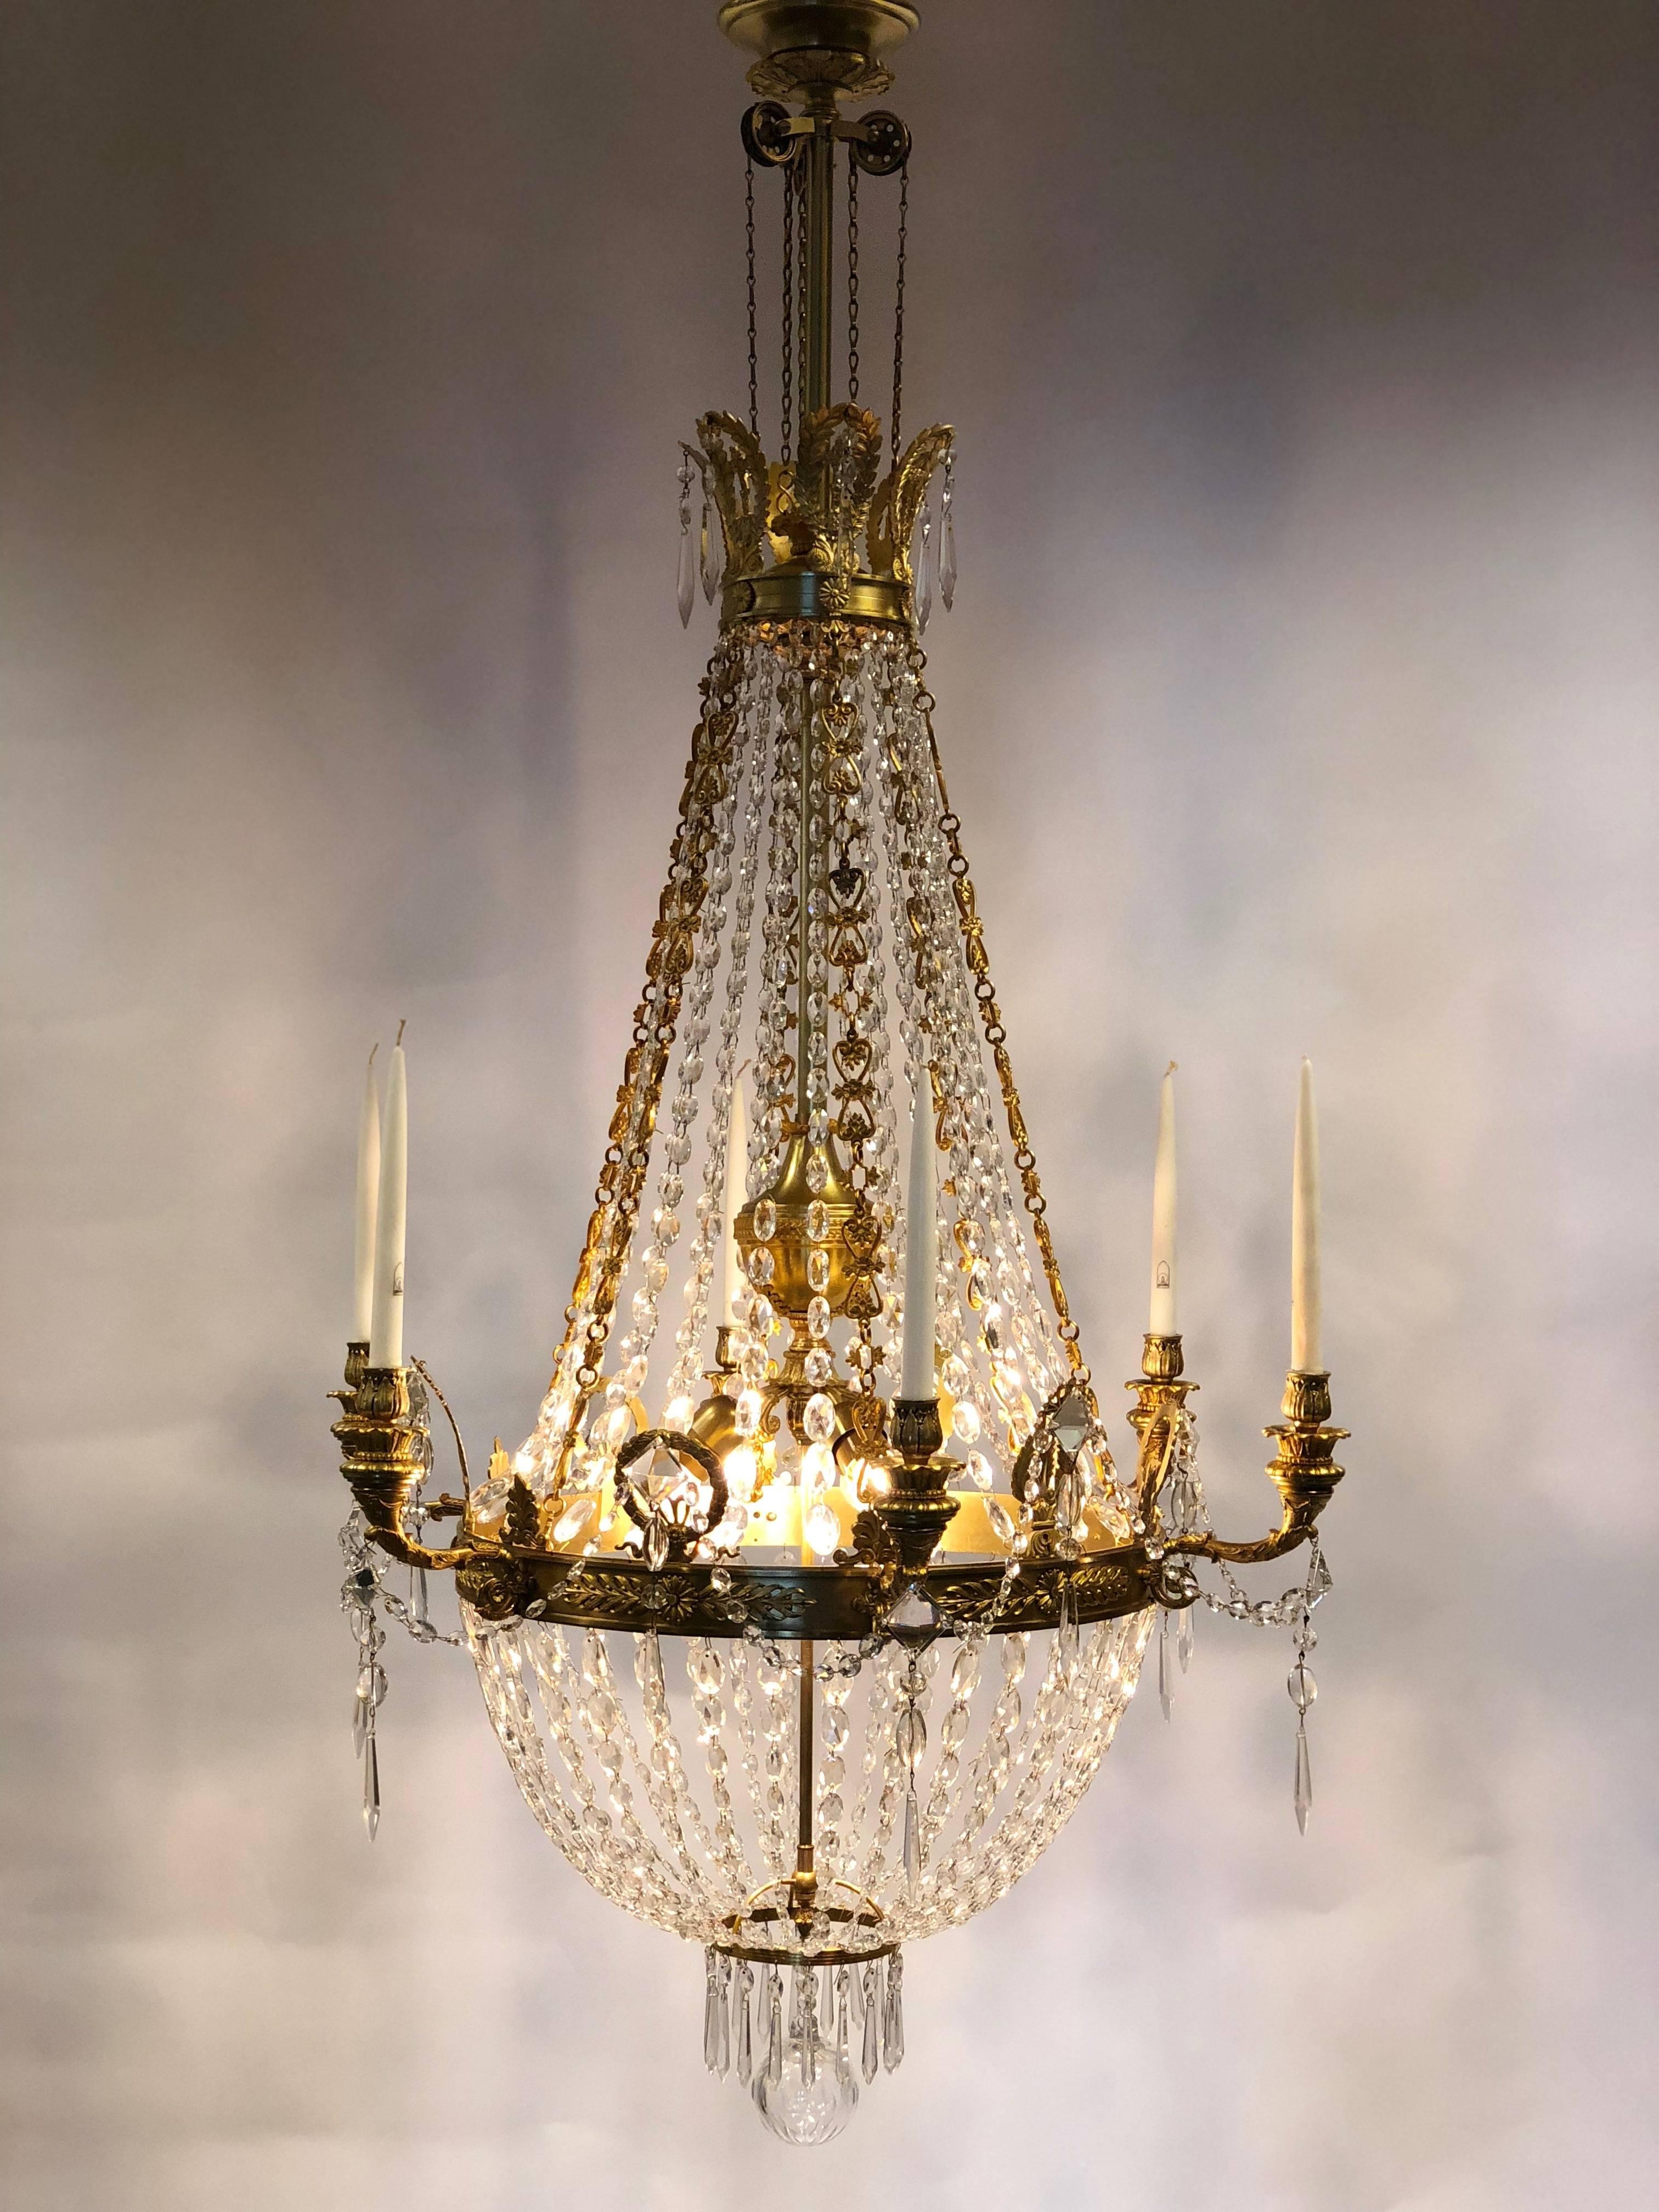 19th Century French Antique Gilded Bronze Empire Chandelier from 1810 For Sale